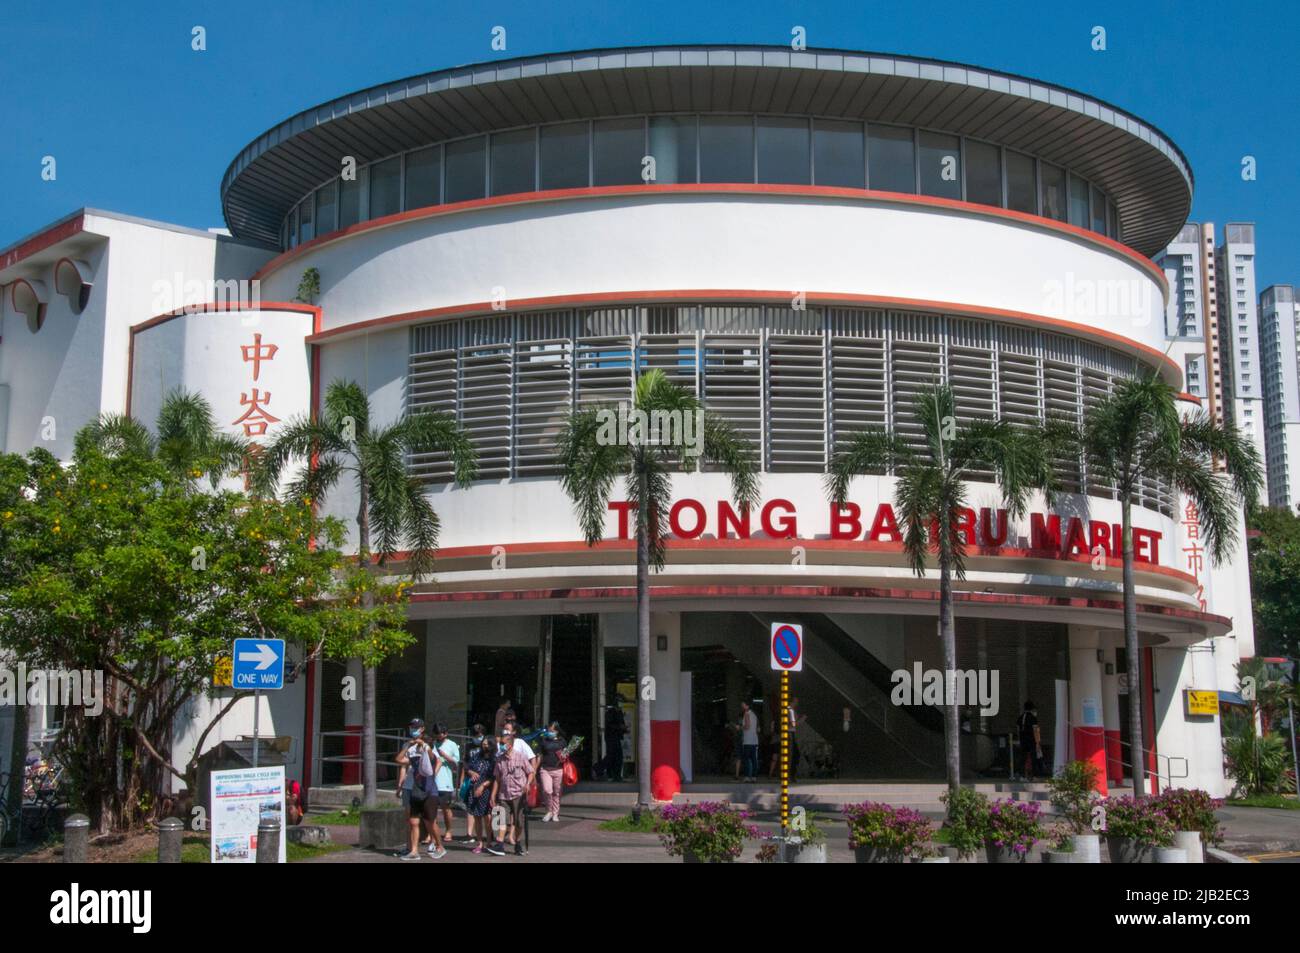 Streamline moderne-style public market building at Tiong Bahru, the oldest housing estate in Singapore Stock Photo